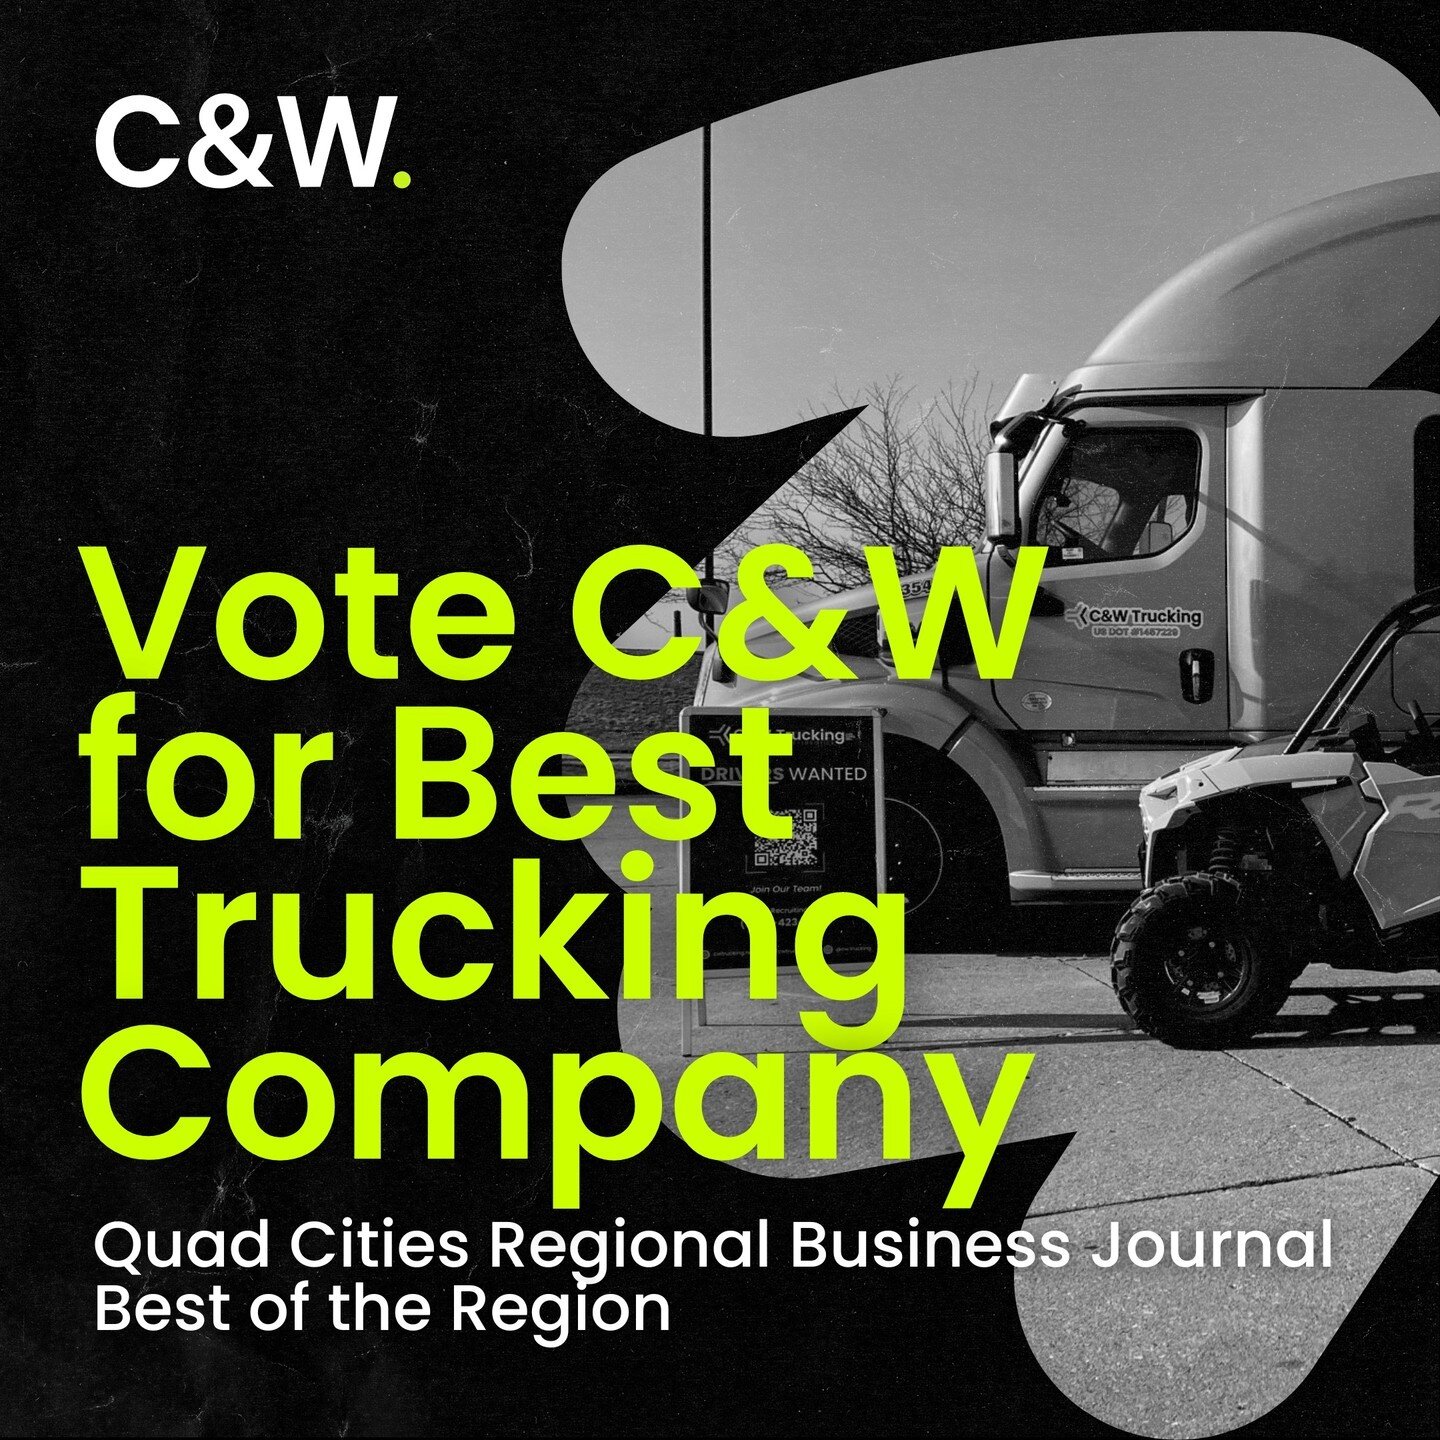 The Quad Cities Regional Business Journal is holding its annual Best of the Region competition, where the people of the Quad Cities vote for their favorite businesses to do business with in the QC. Visit the QCBJ website to vote for C&amp;W as the Be